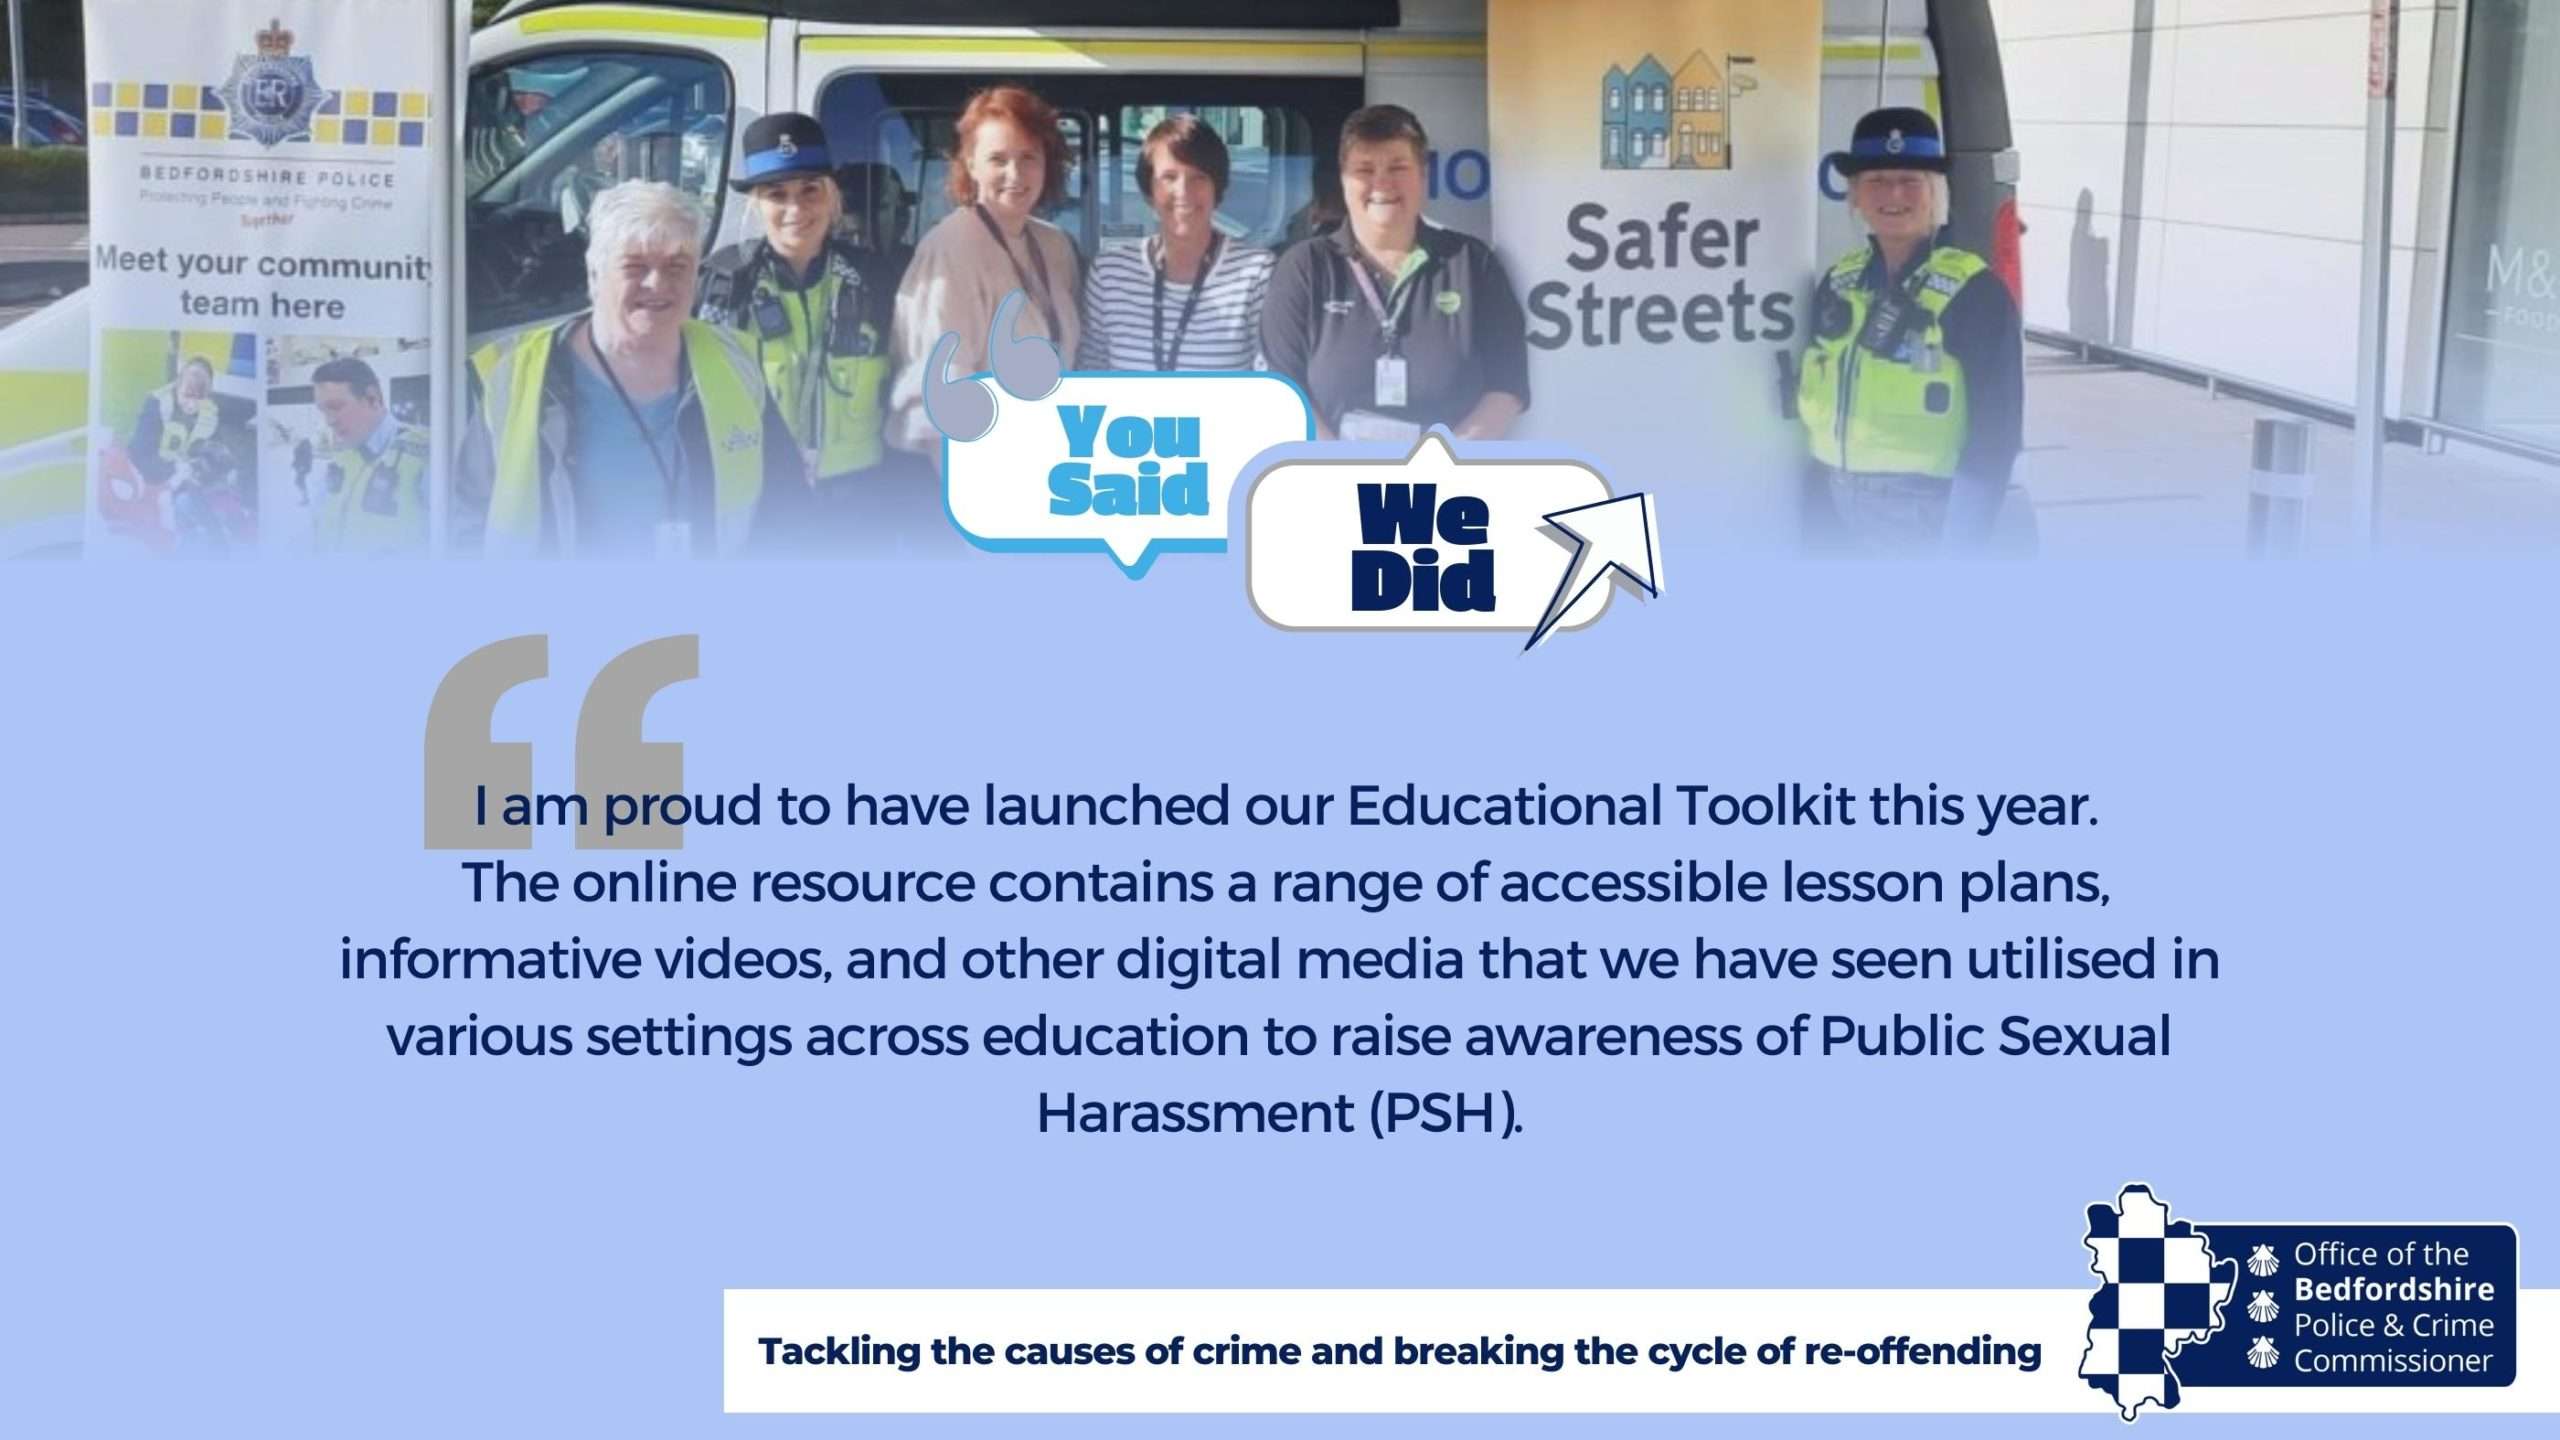 Priority 3, Tackling the causes of crime and breaking the cycle